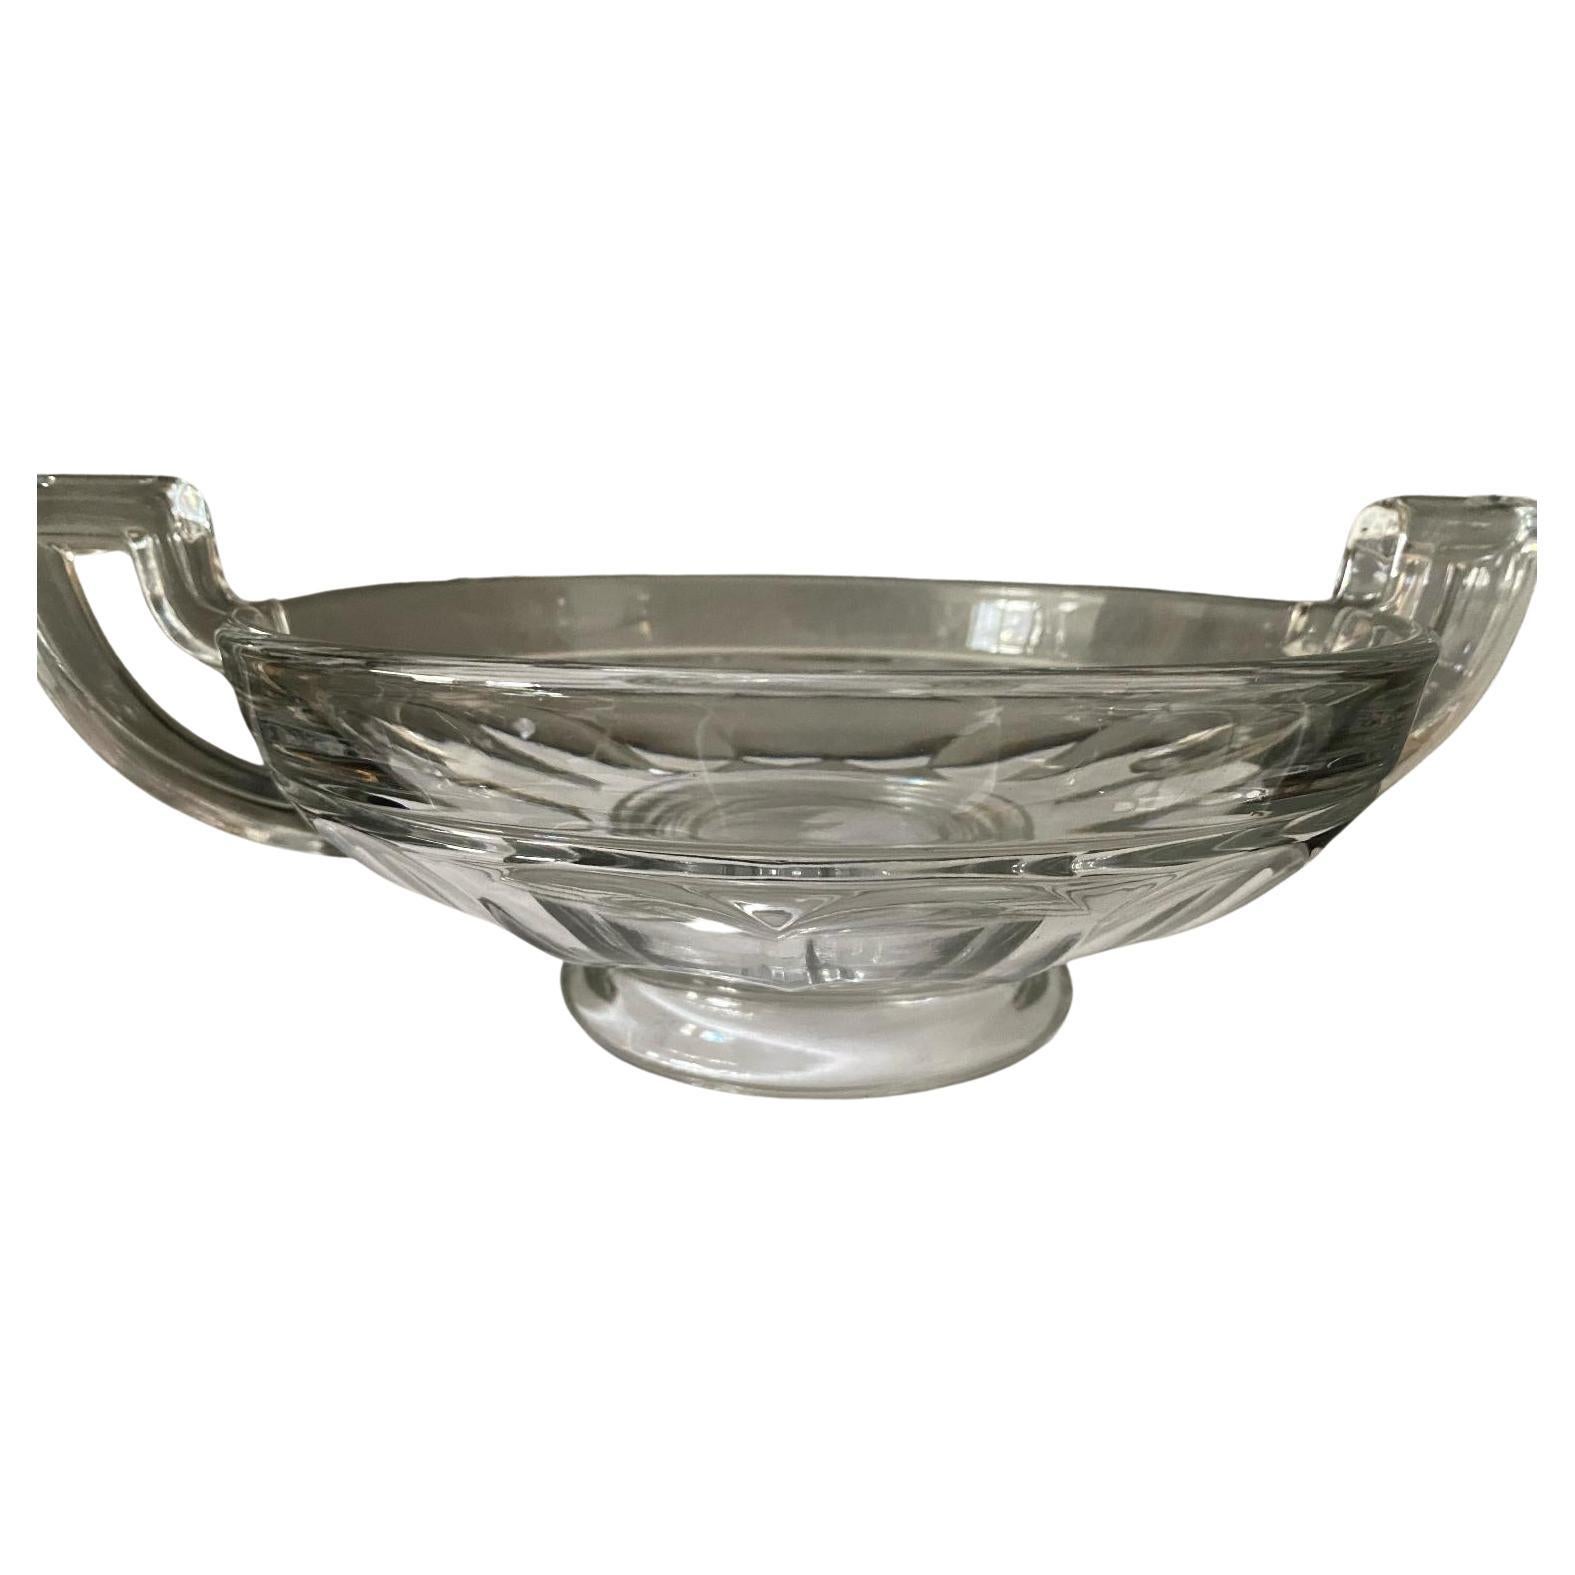 Stylish Art Deco bowl, made in 1930s but still has a modern feel.